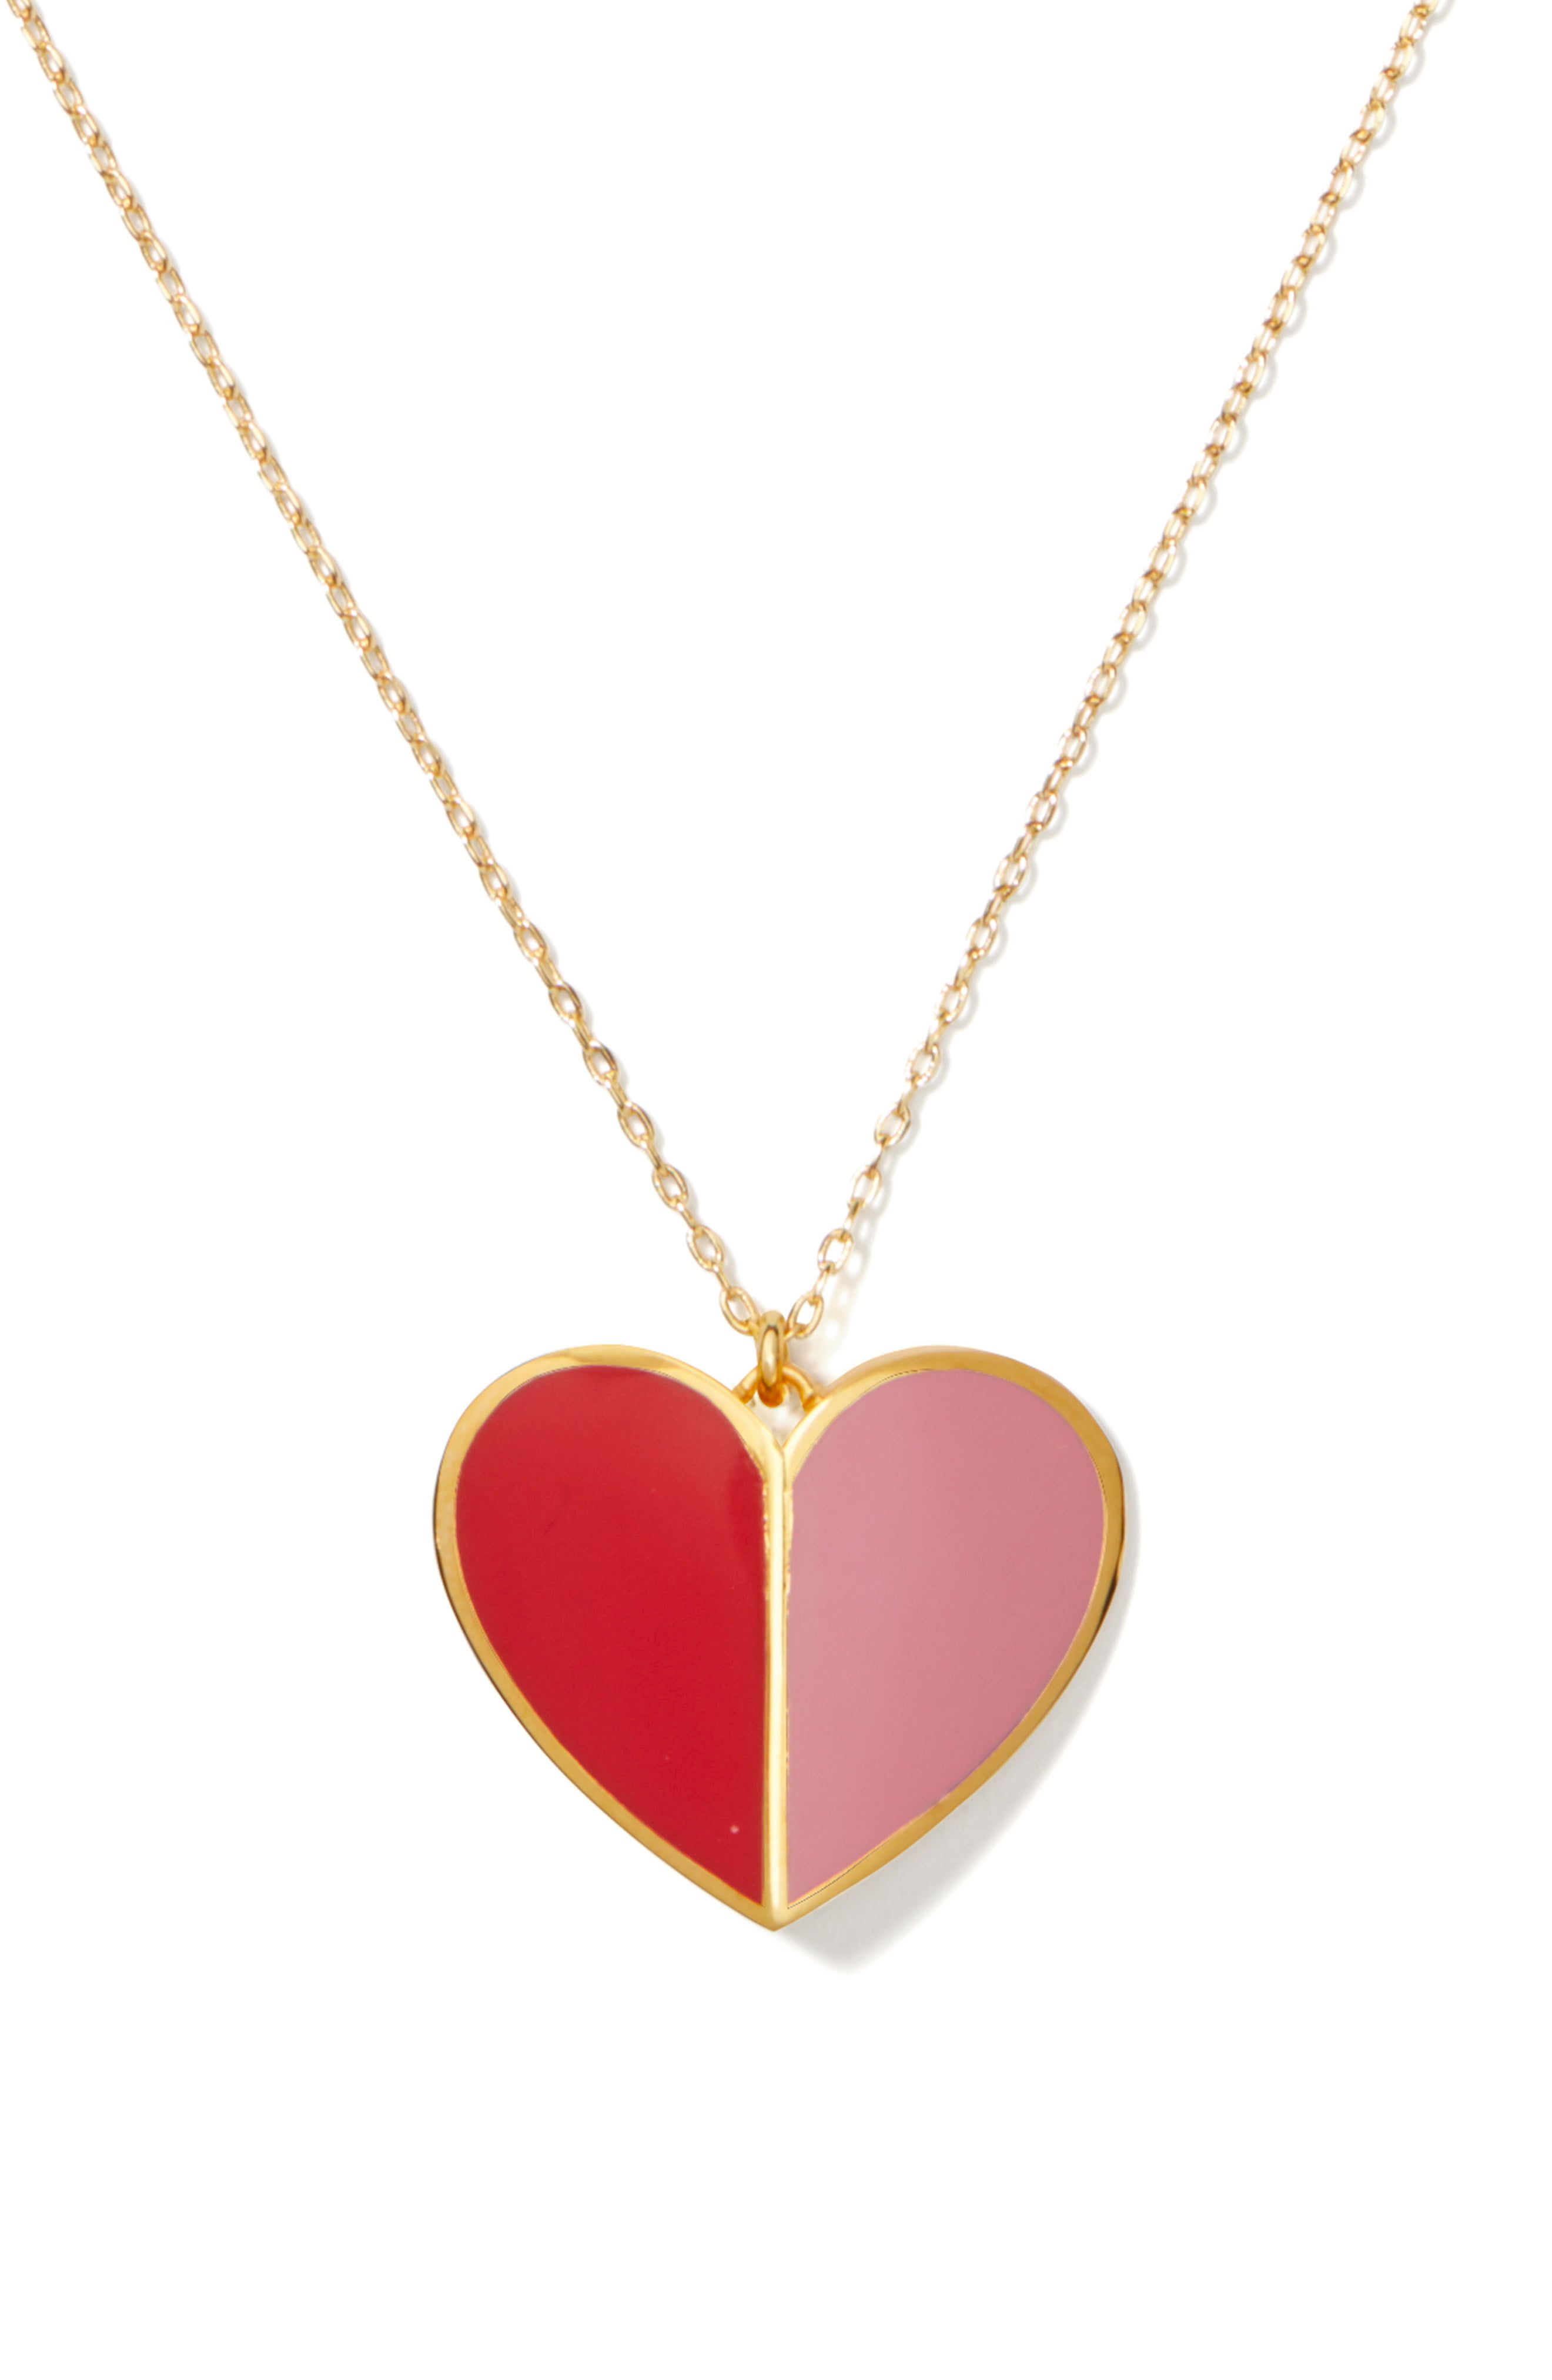 Women's Lovely Gold Plated Resin Filled Heart Shaped Necklace Jewellery Gift UK